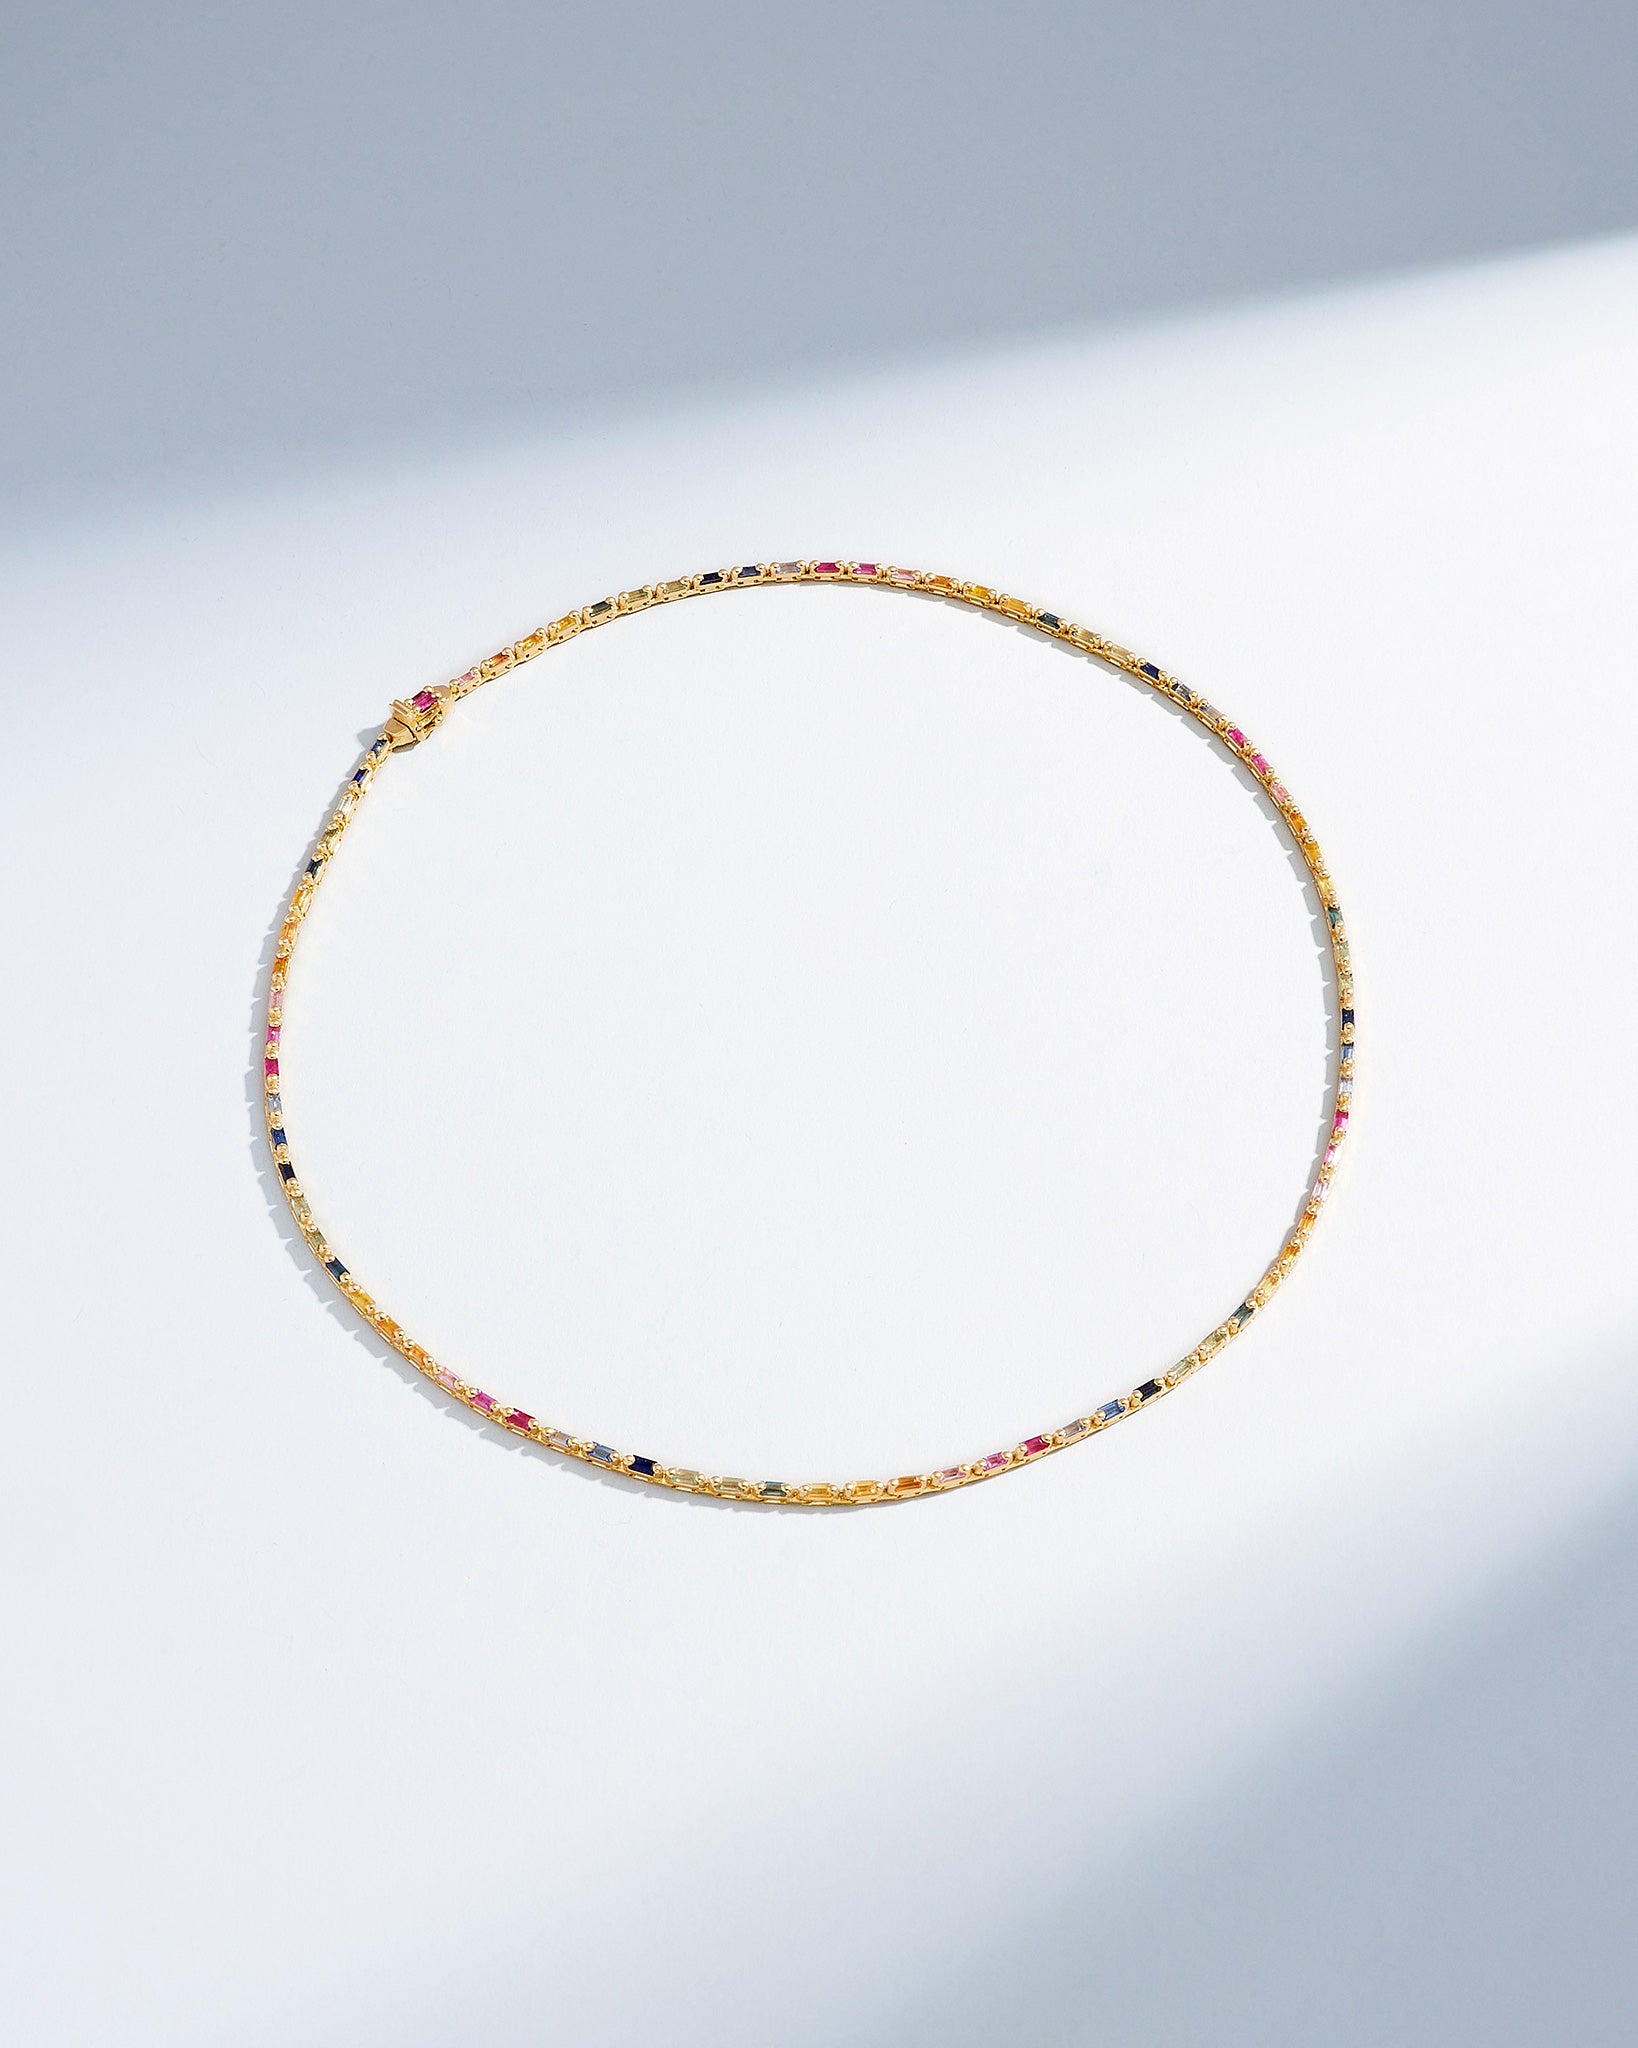 Suzanne Kalan Linear Full Rainbow Sapphire Tennis Necklace in 18k yellow gold